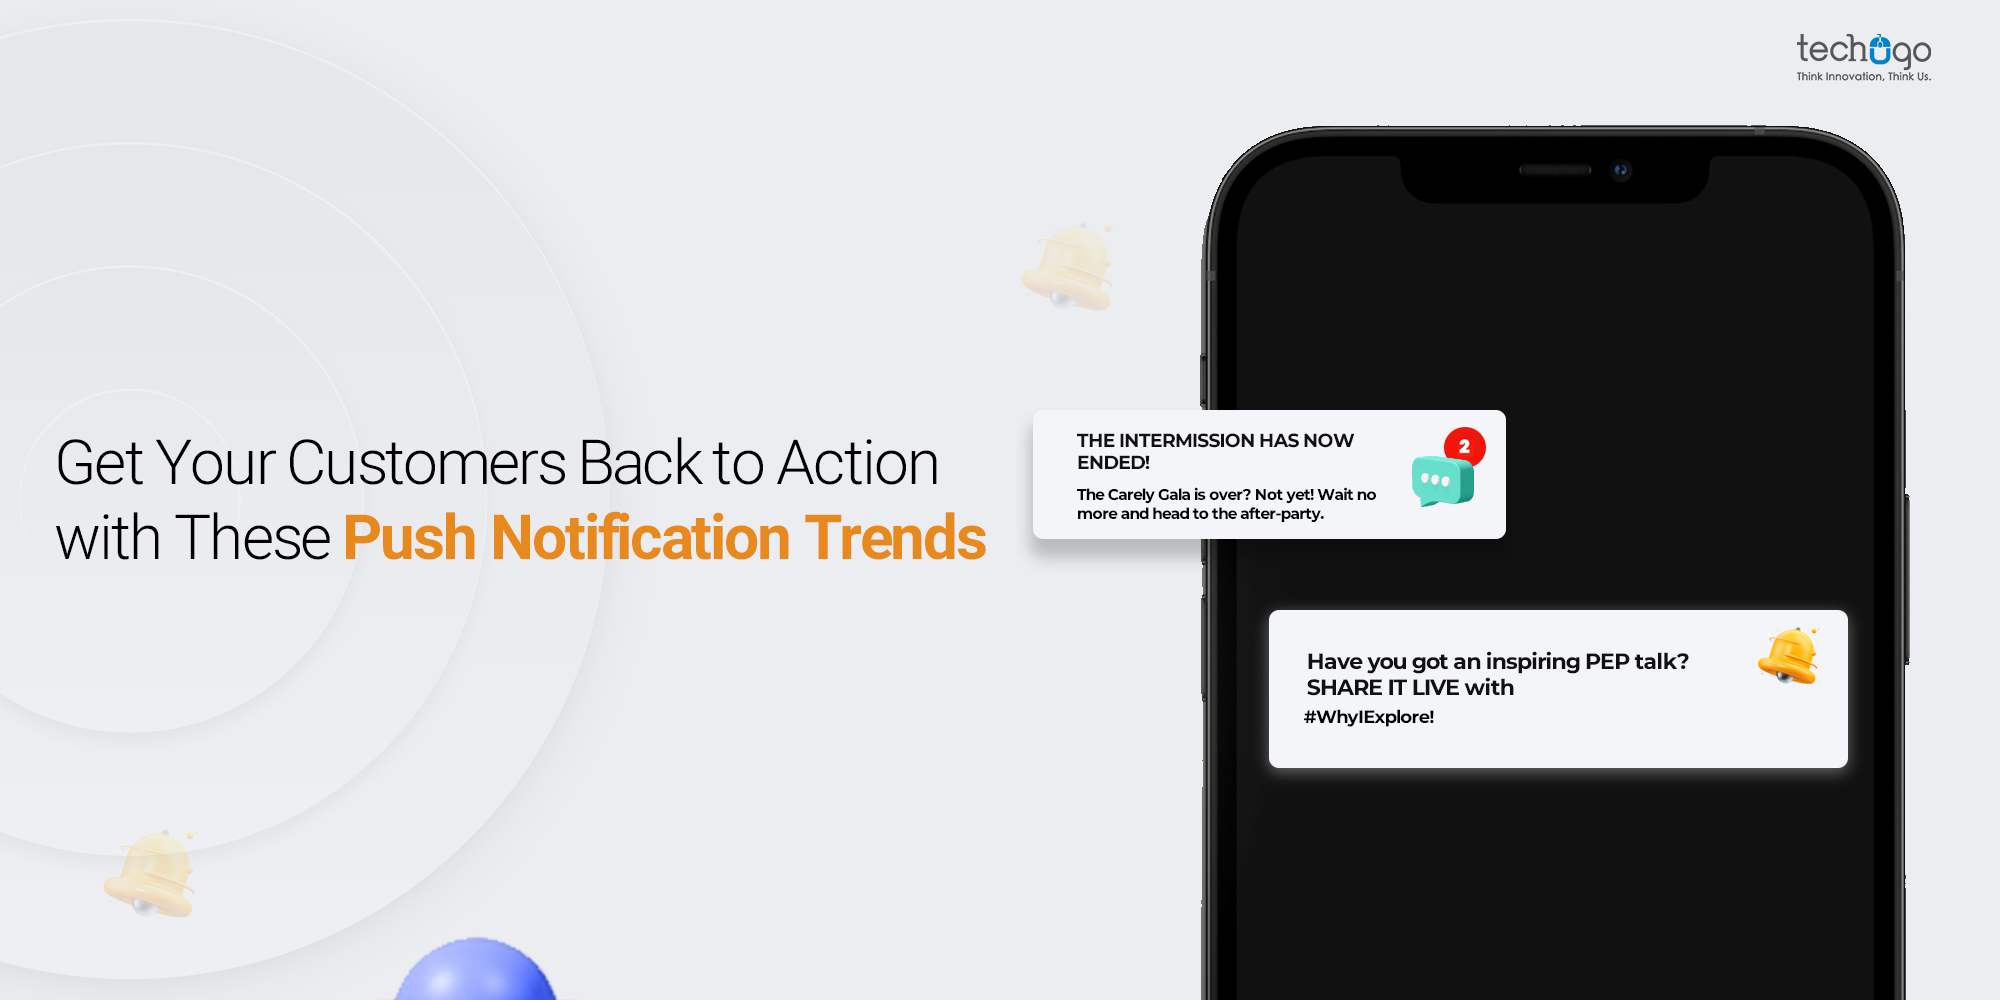 Get Your Customers Back to Action with These Push Notification Trends